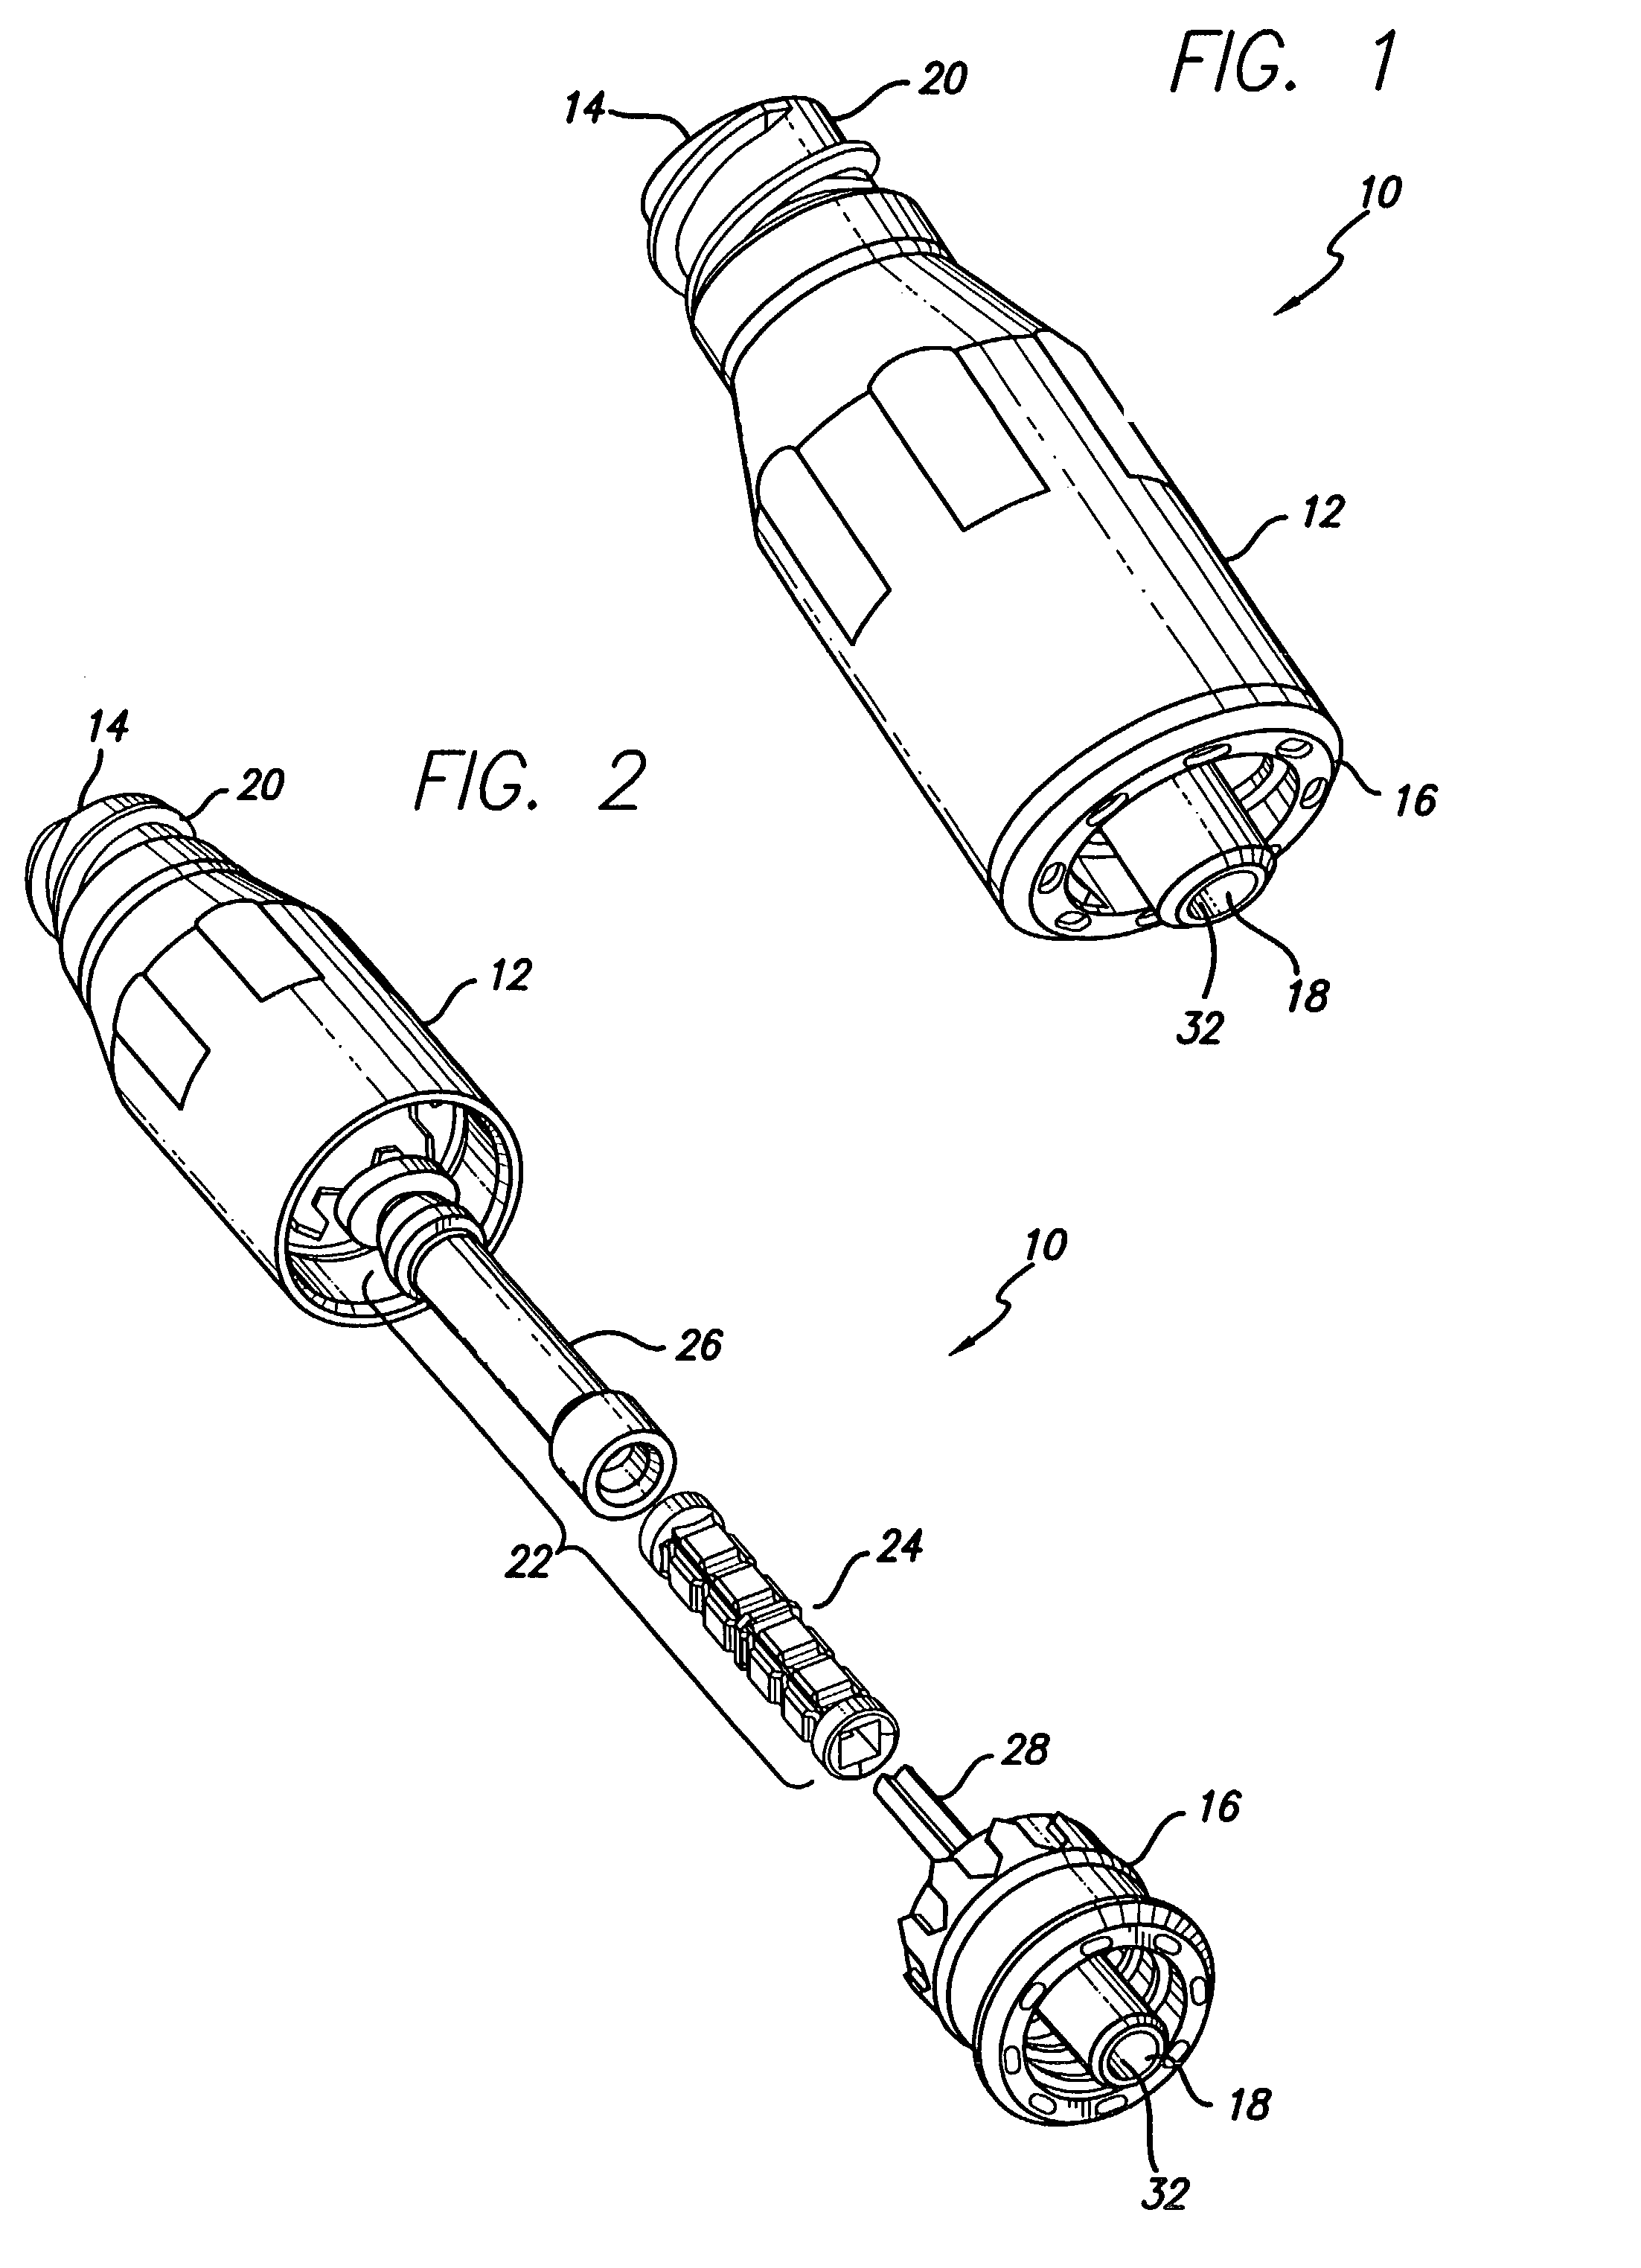 Needleless medical connector with expandable valve mechanism